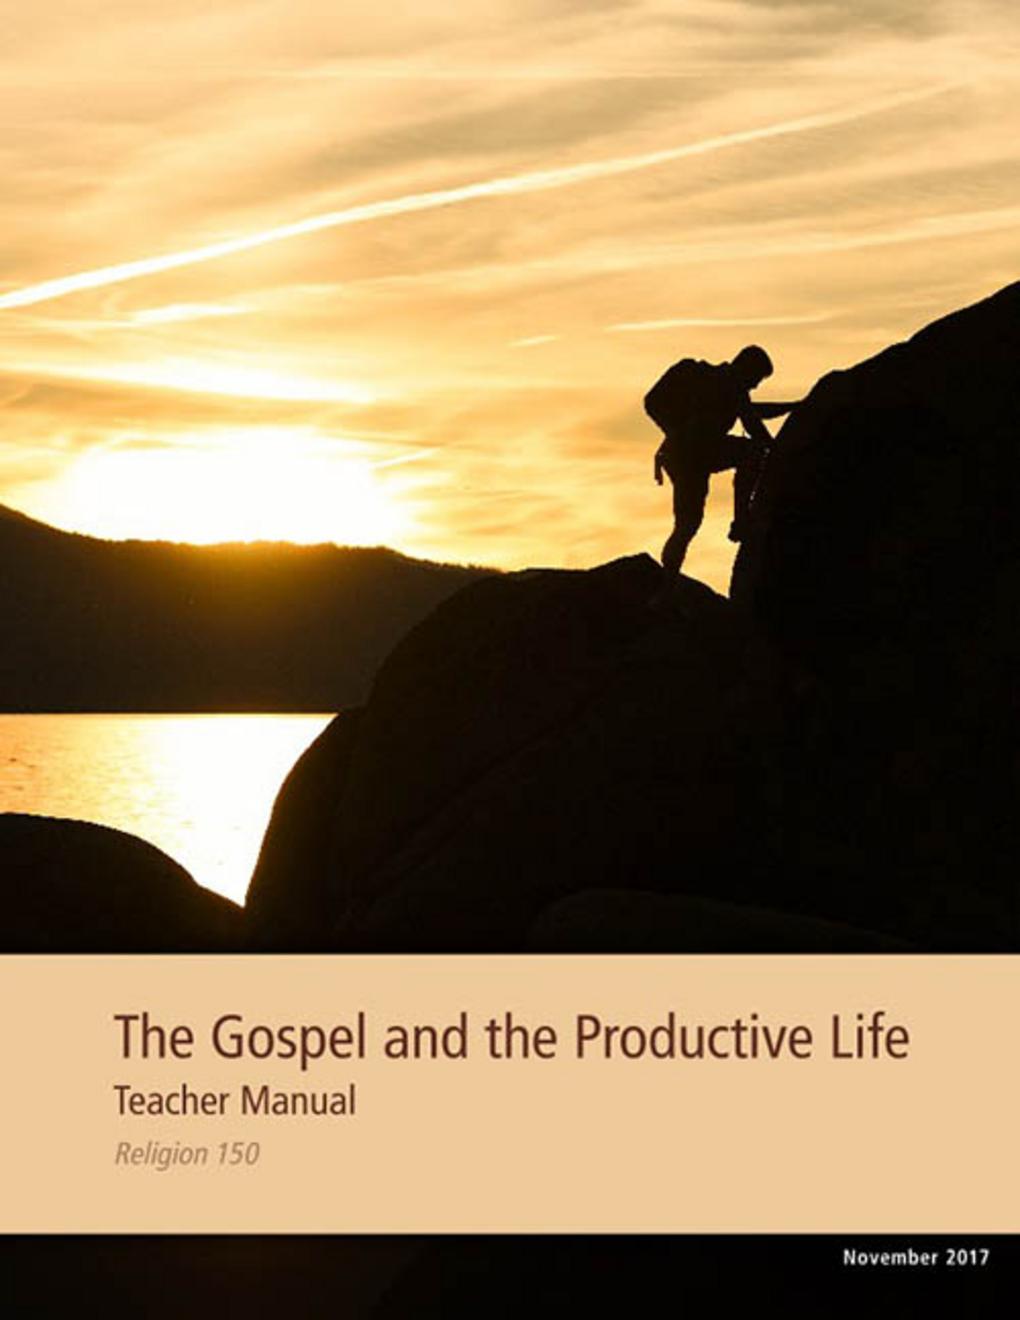 The Gospel and the Productive Life Teacher Manual (Rel 150)